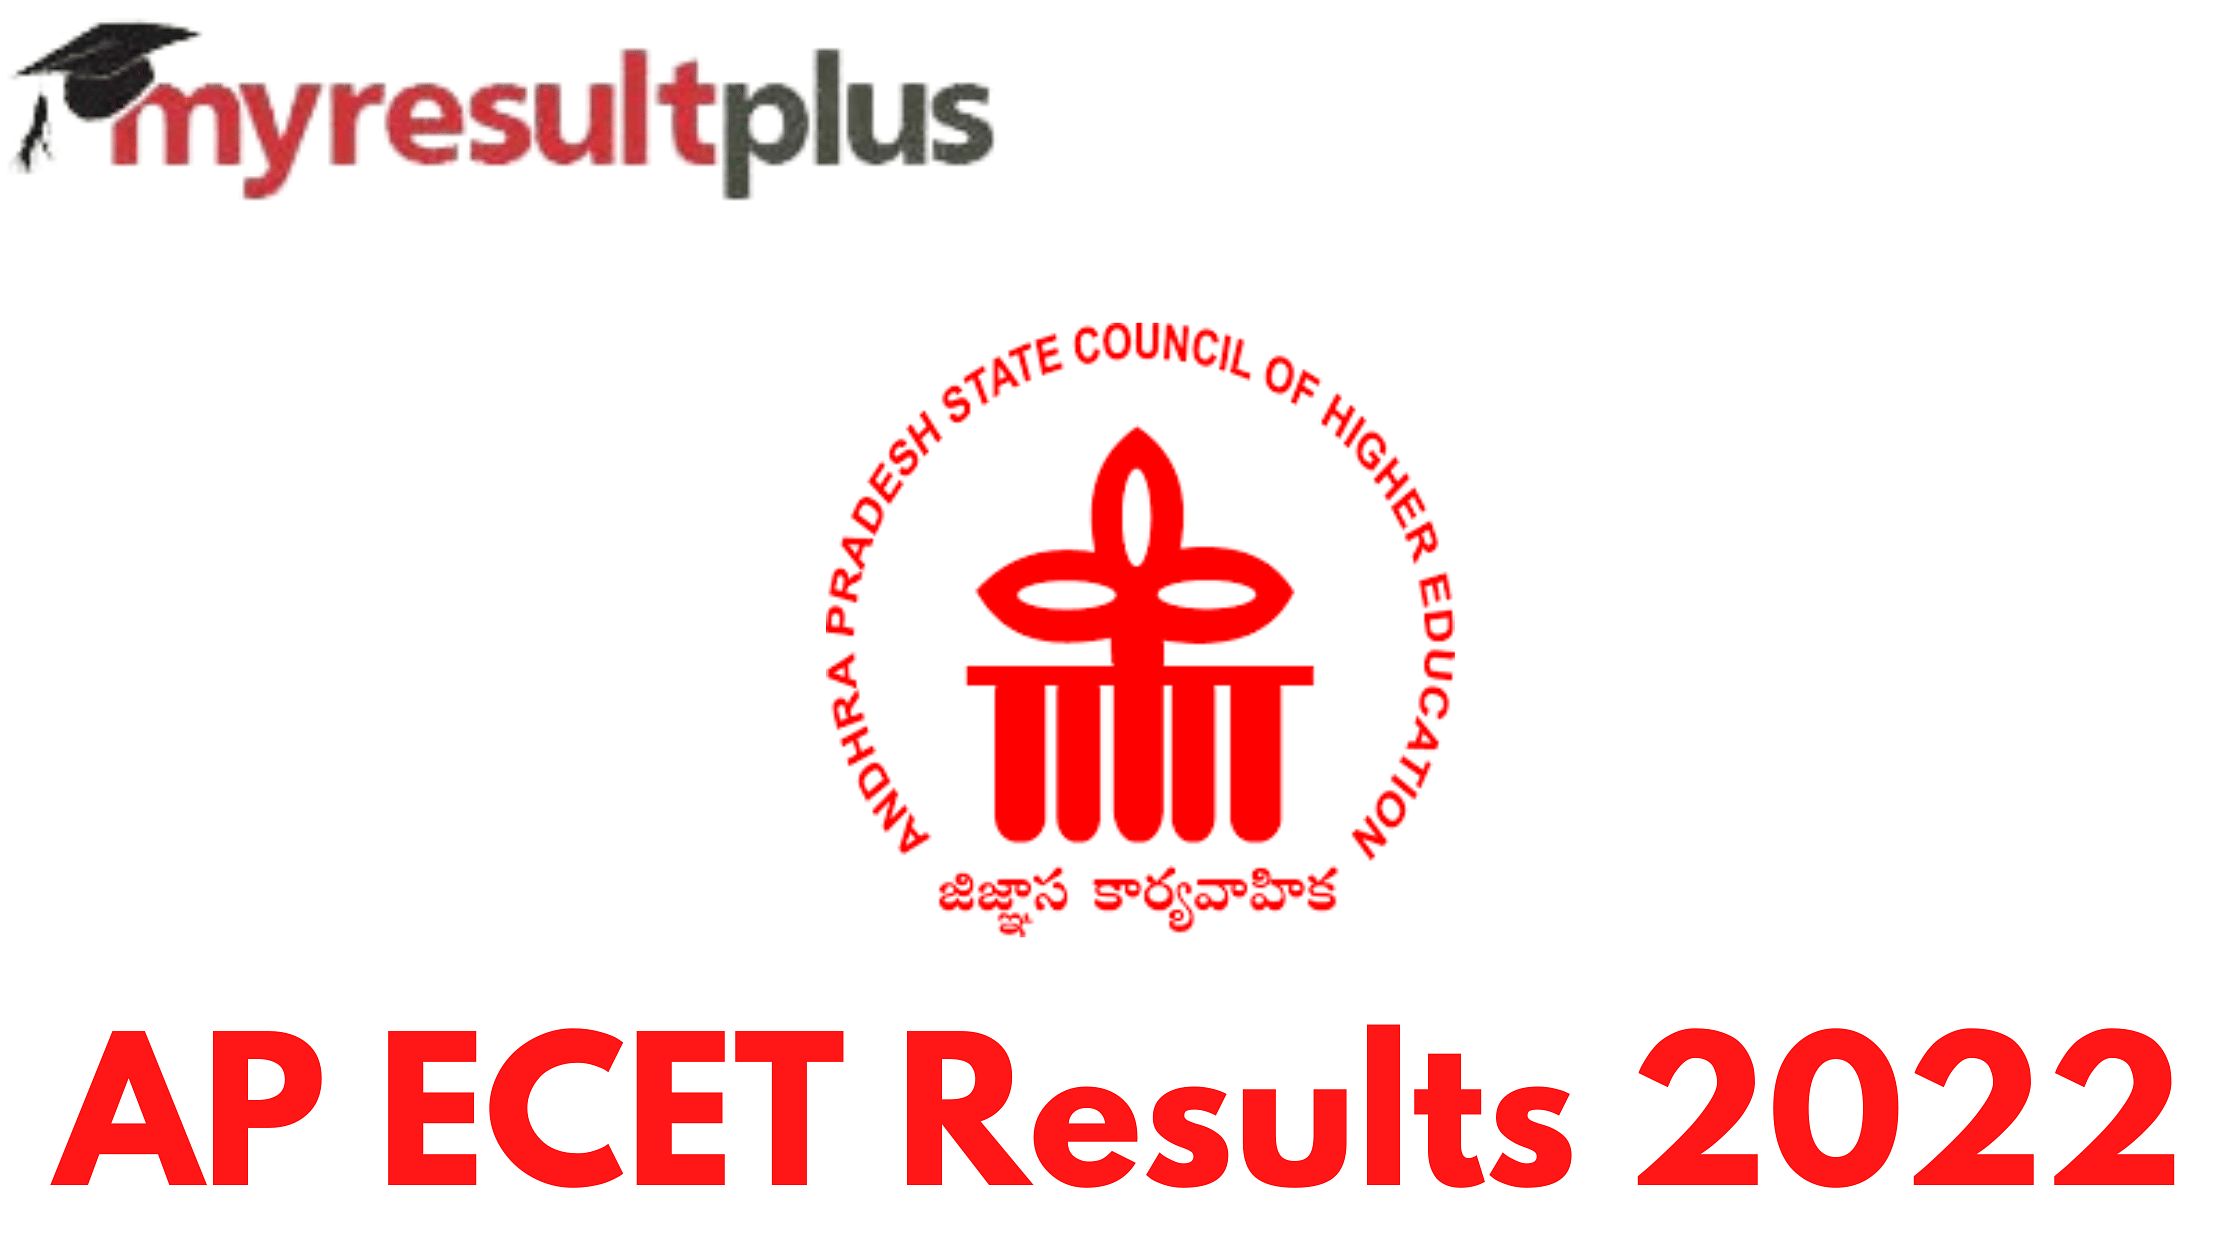 AP ECET Results 2022 Announced, Direct Link to Download Scorecard Here